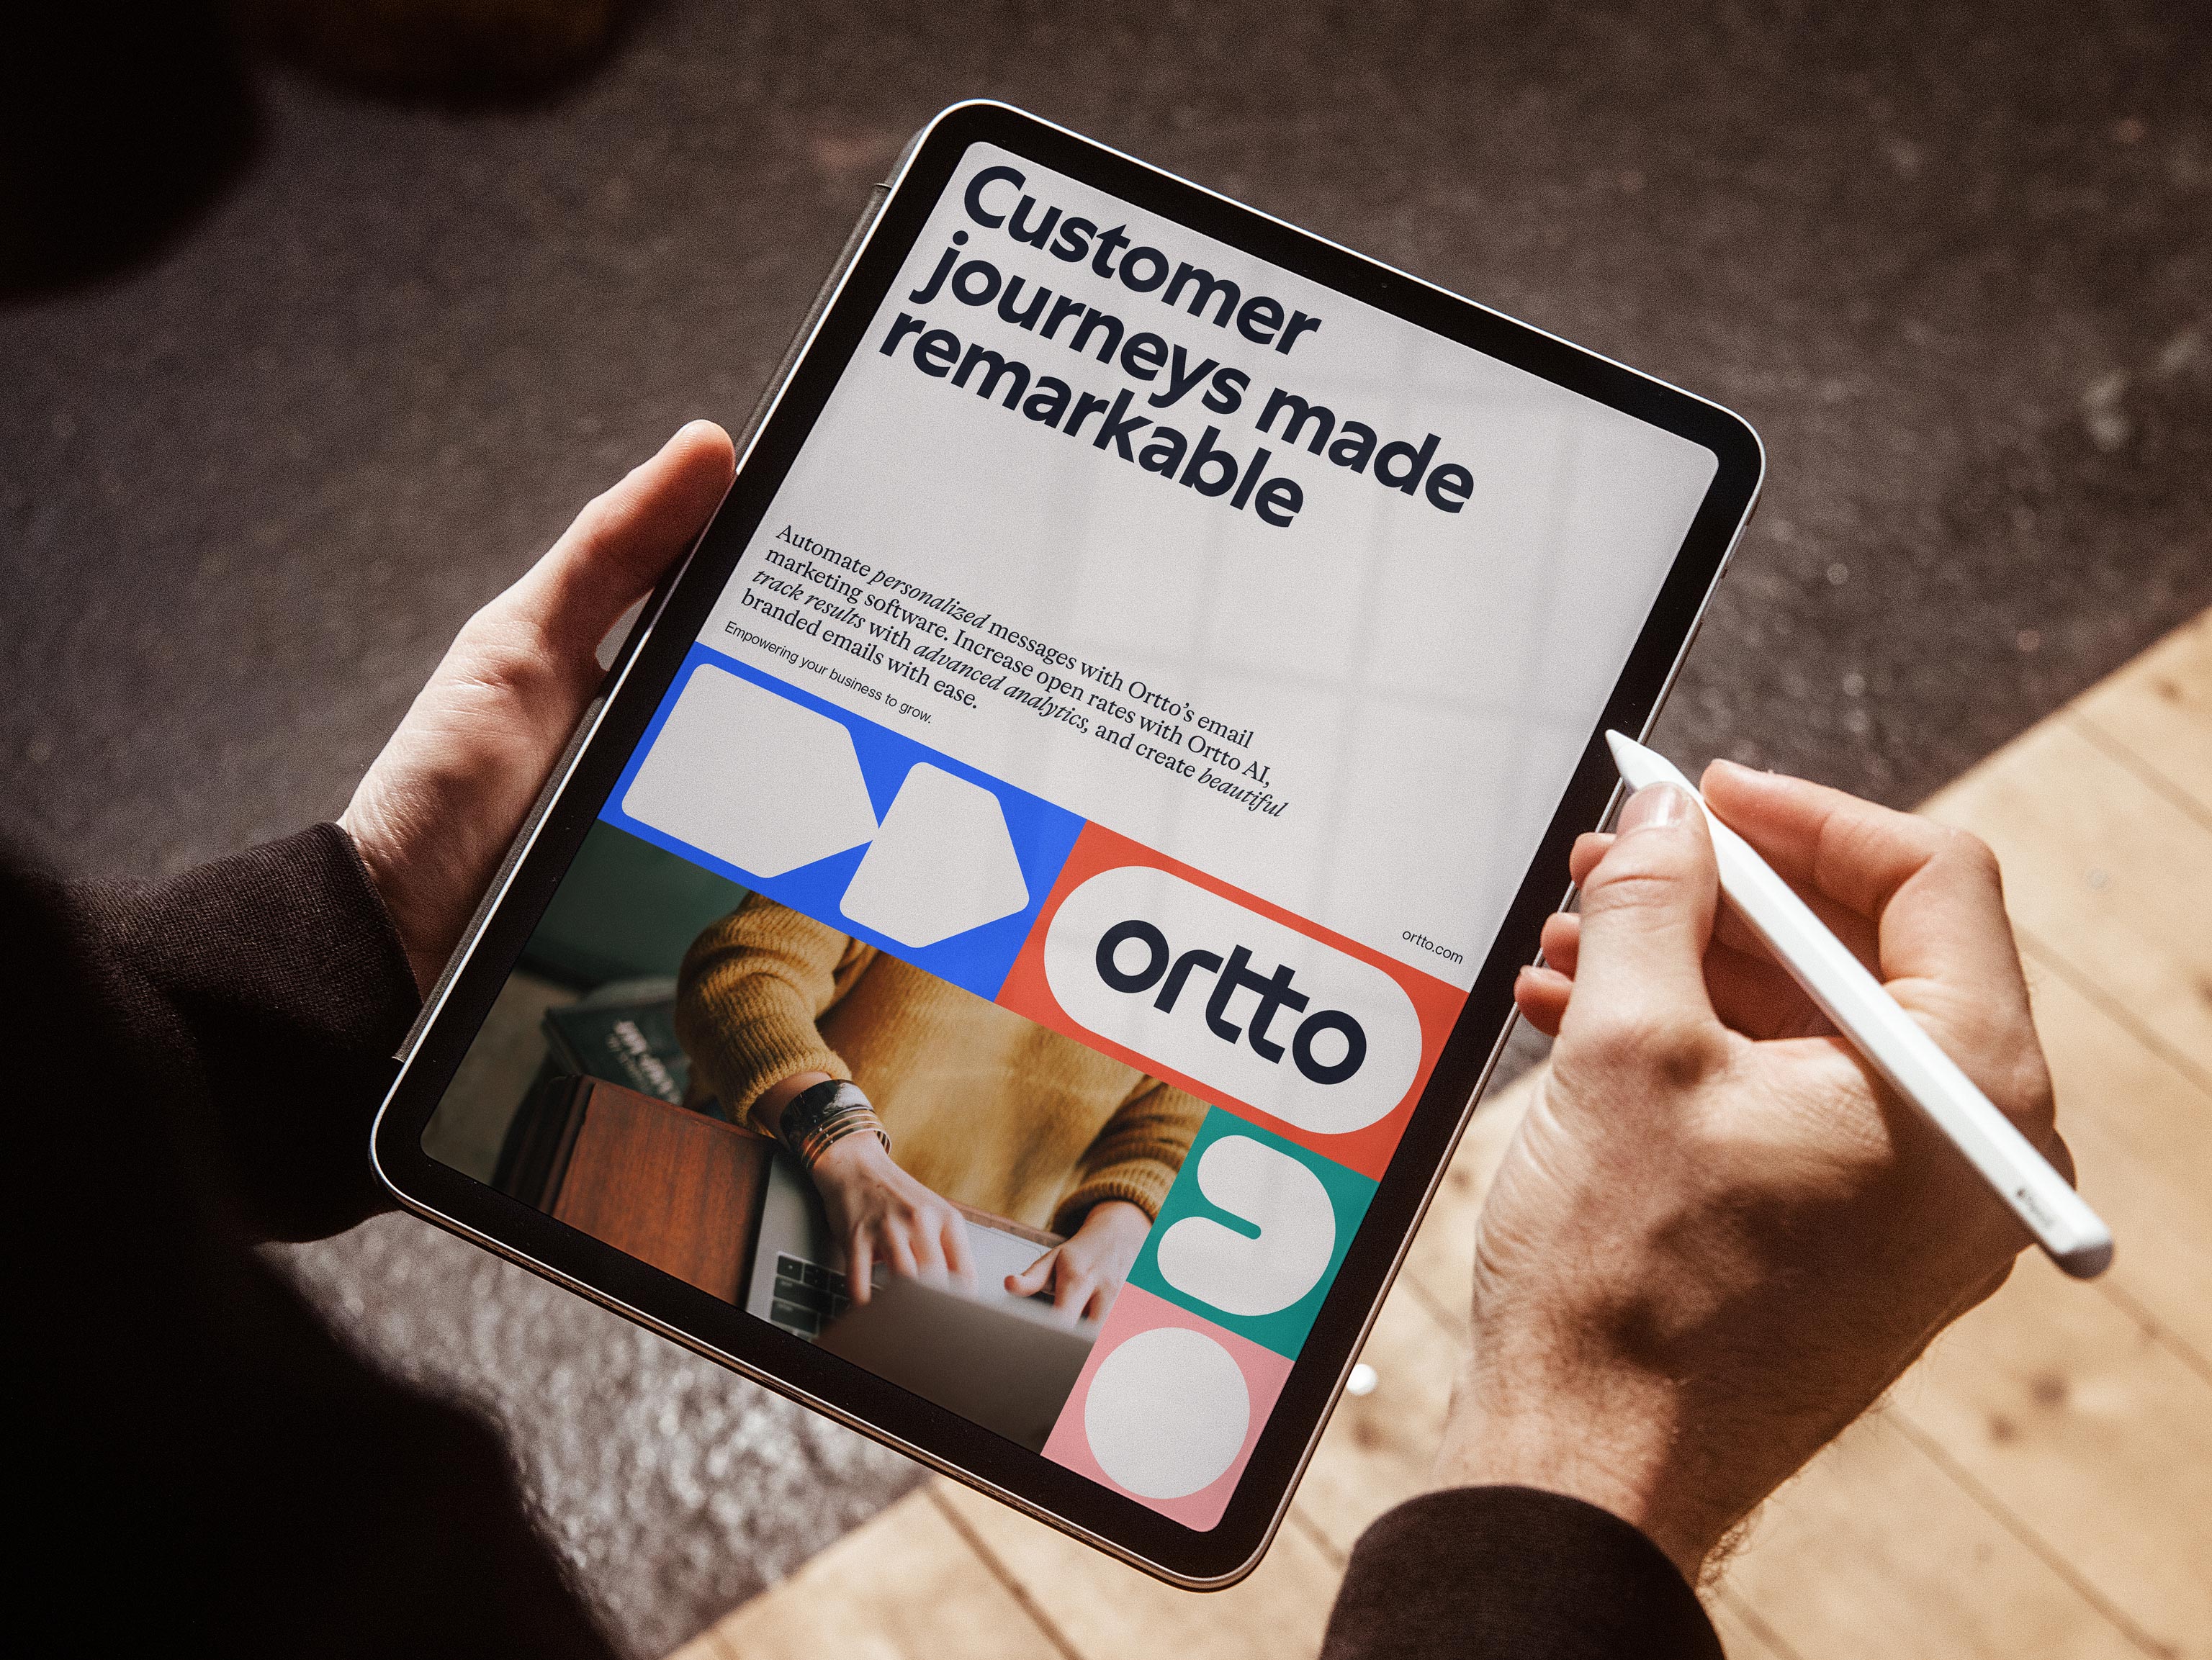 New brand identity and website for automation, analytics and customer journey company Ortto designed by Christopher Doyle & Co